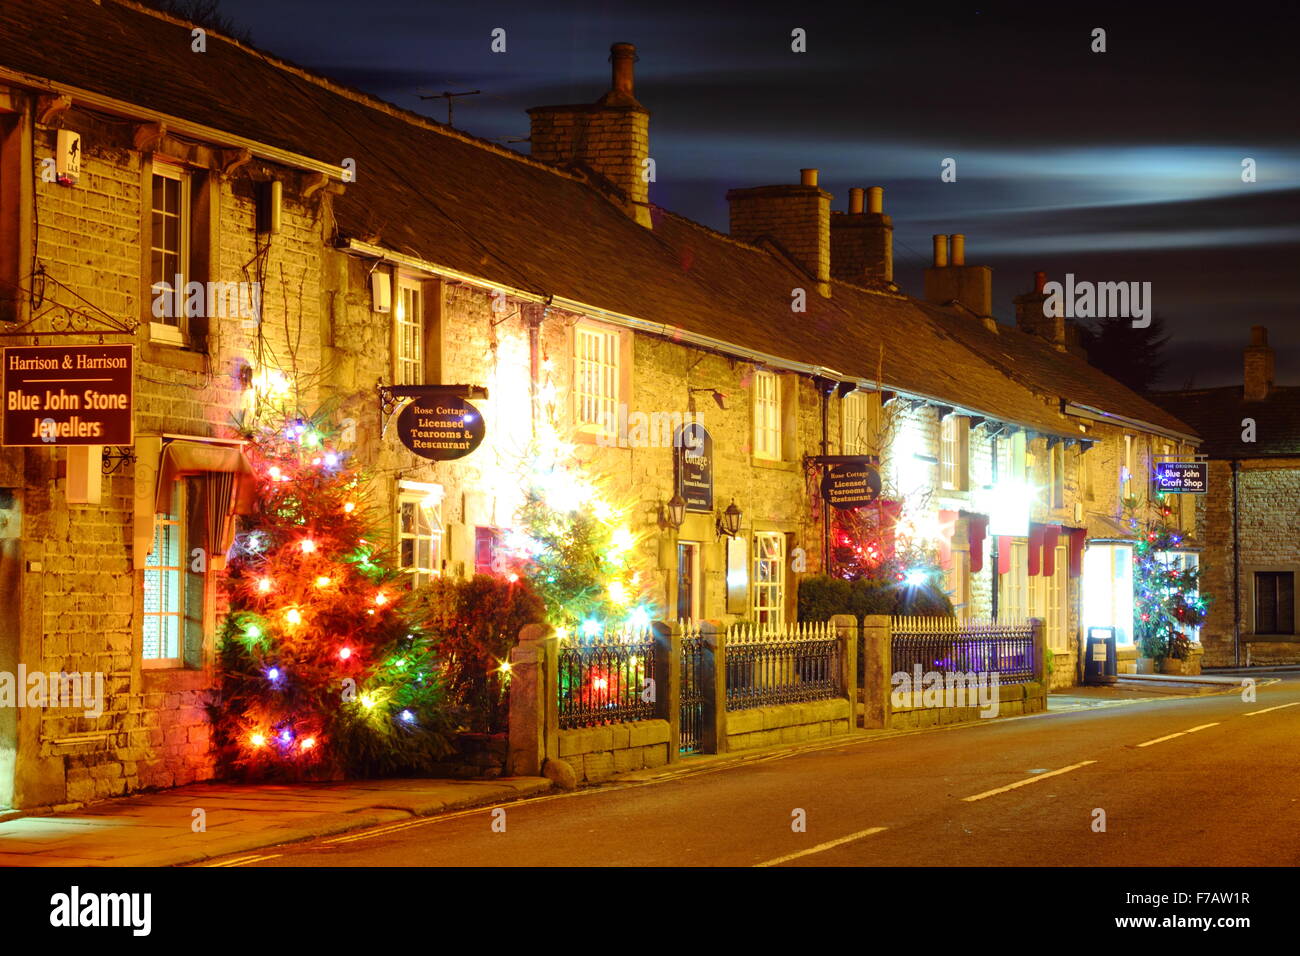 Illuminated Christmas trees line the main street in Castleton; a village in the Peak District, Derbyshire UK Stock Photo